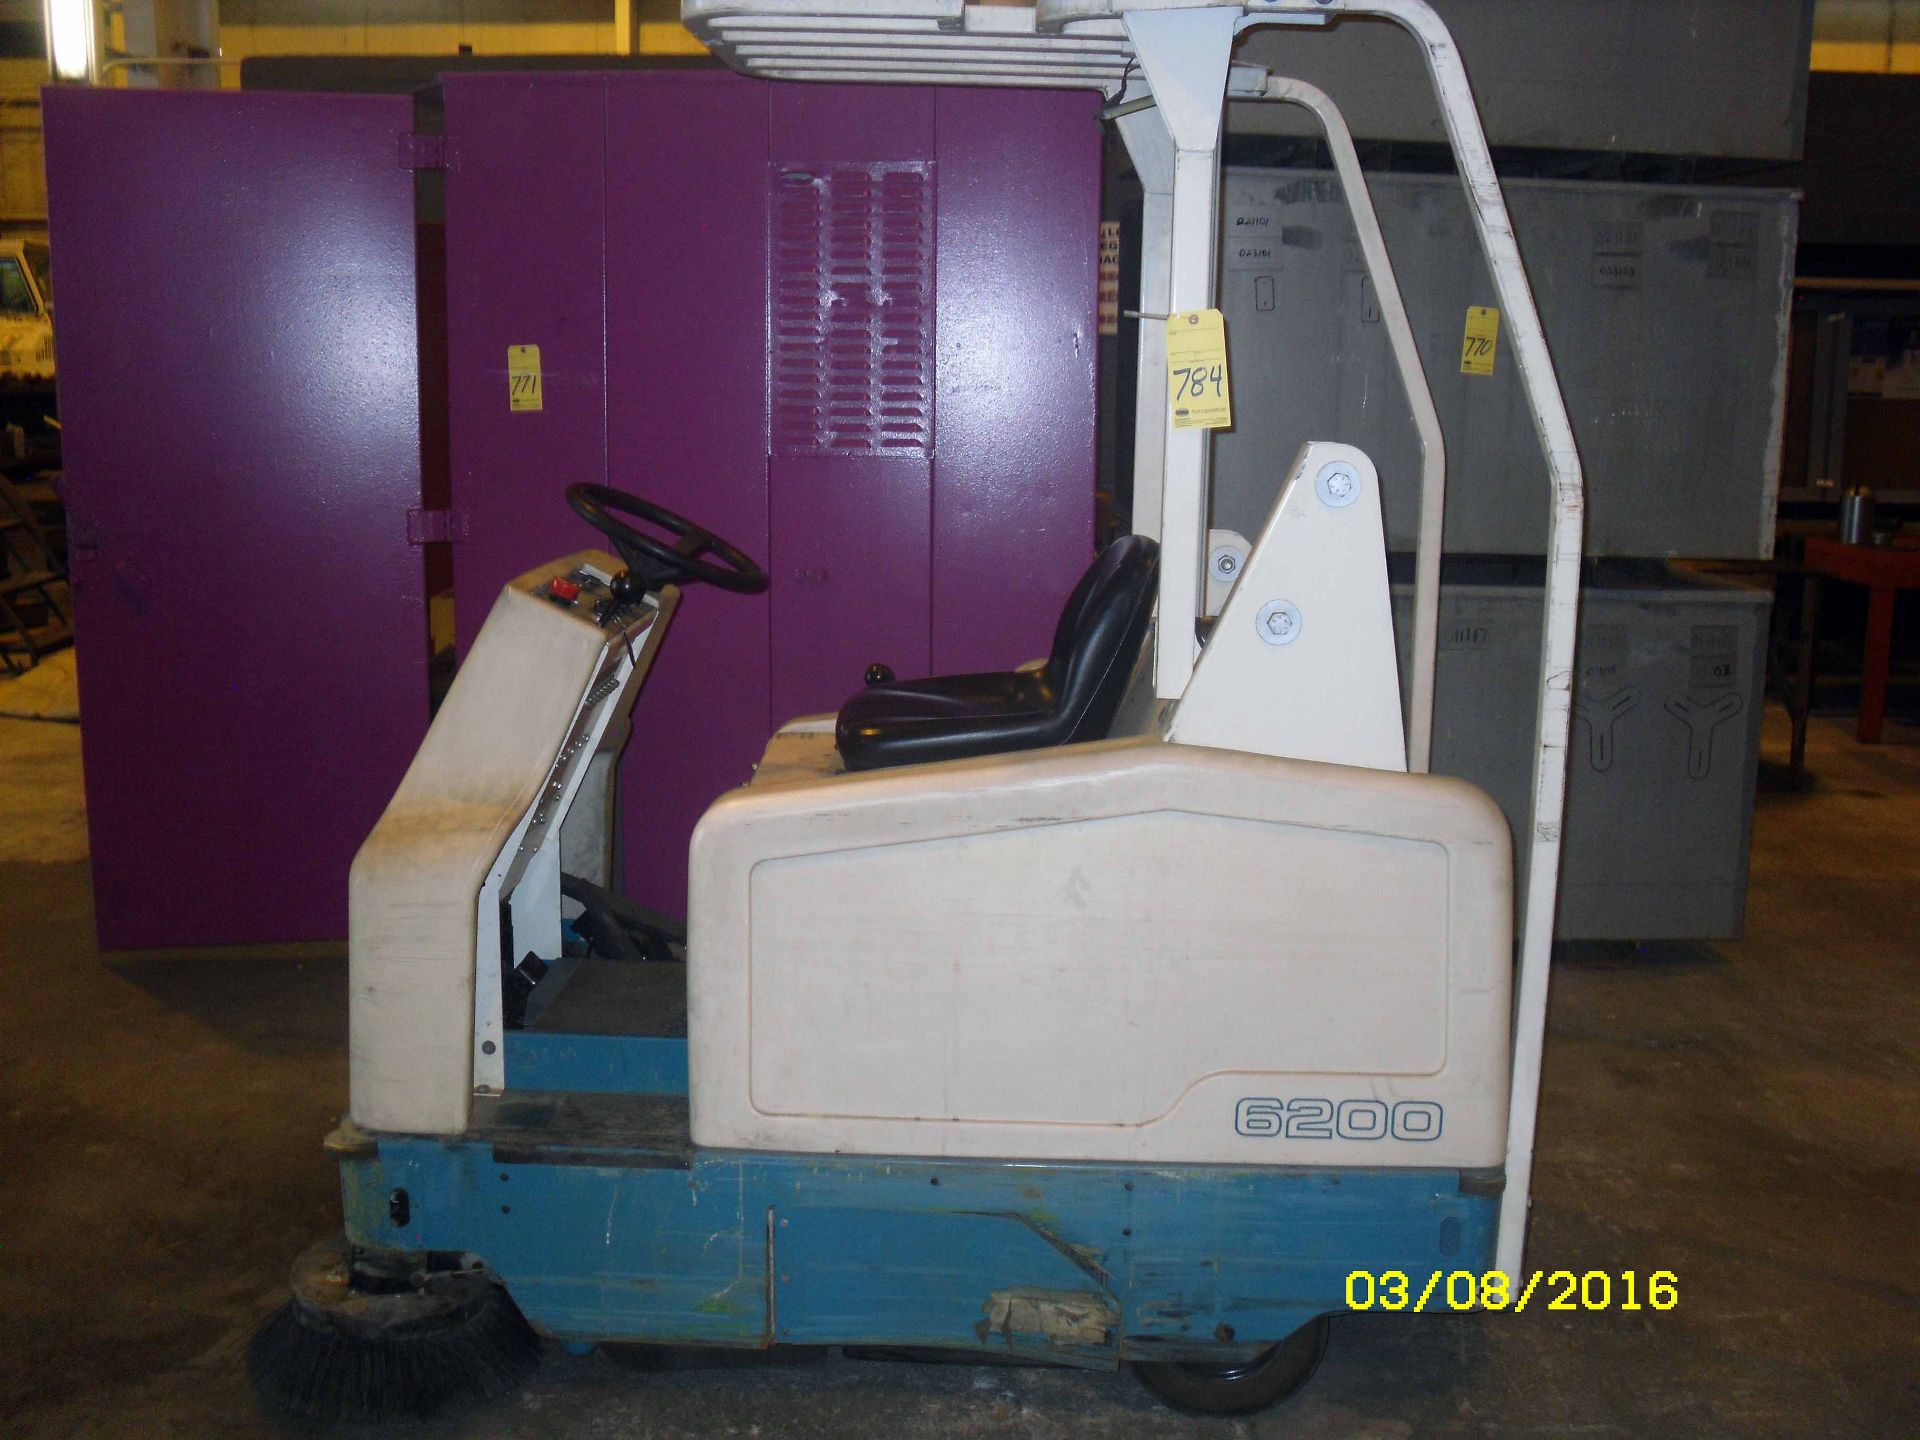 FLOOR SWEEPER, TENNANT MDL. 6200, 36 v., on-board battery charger, S/N 6200-3622